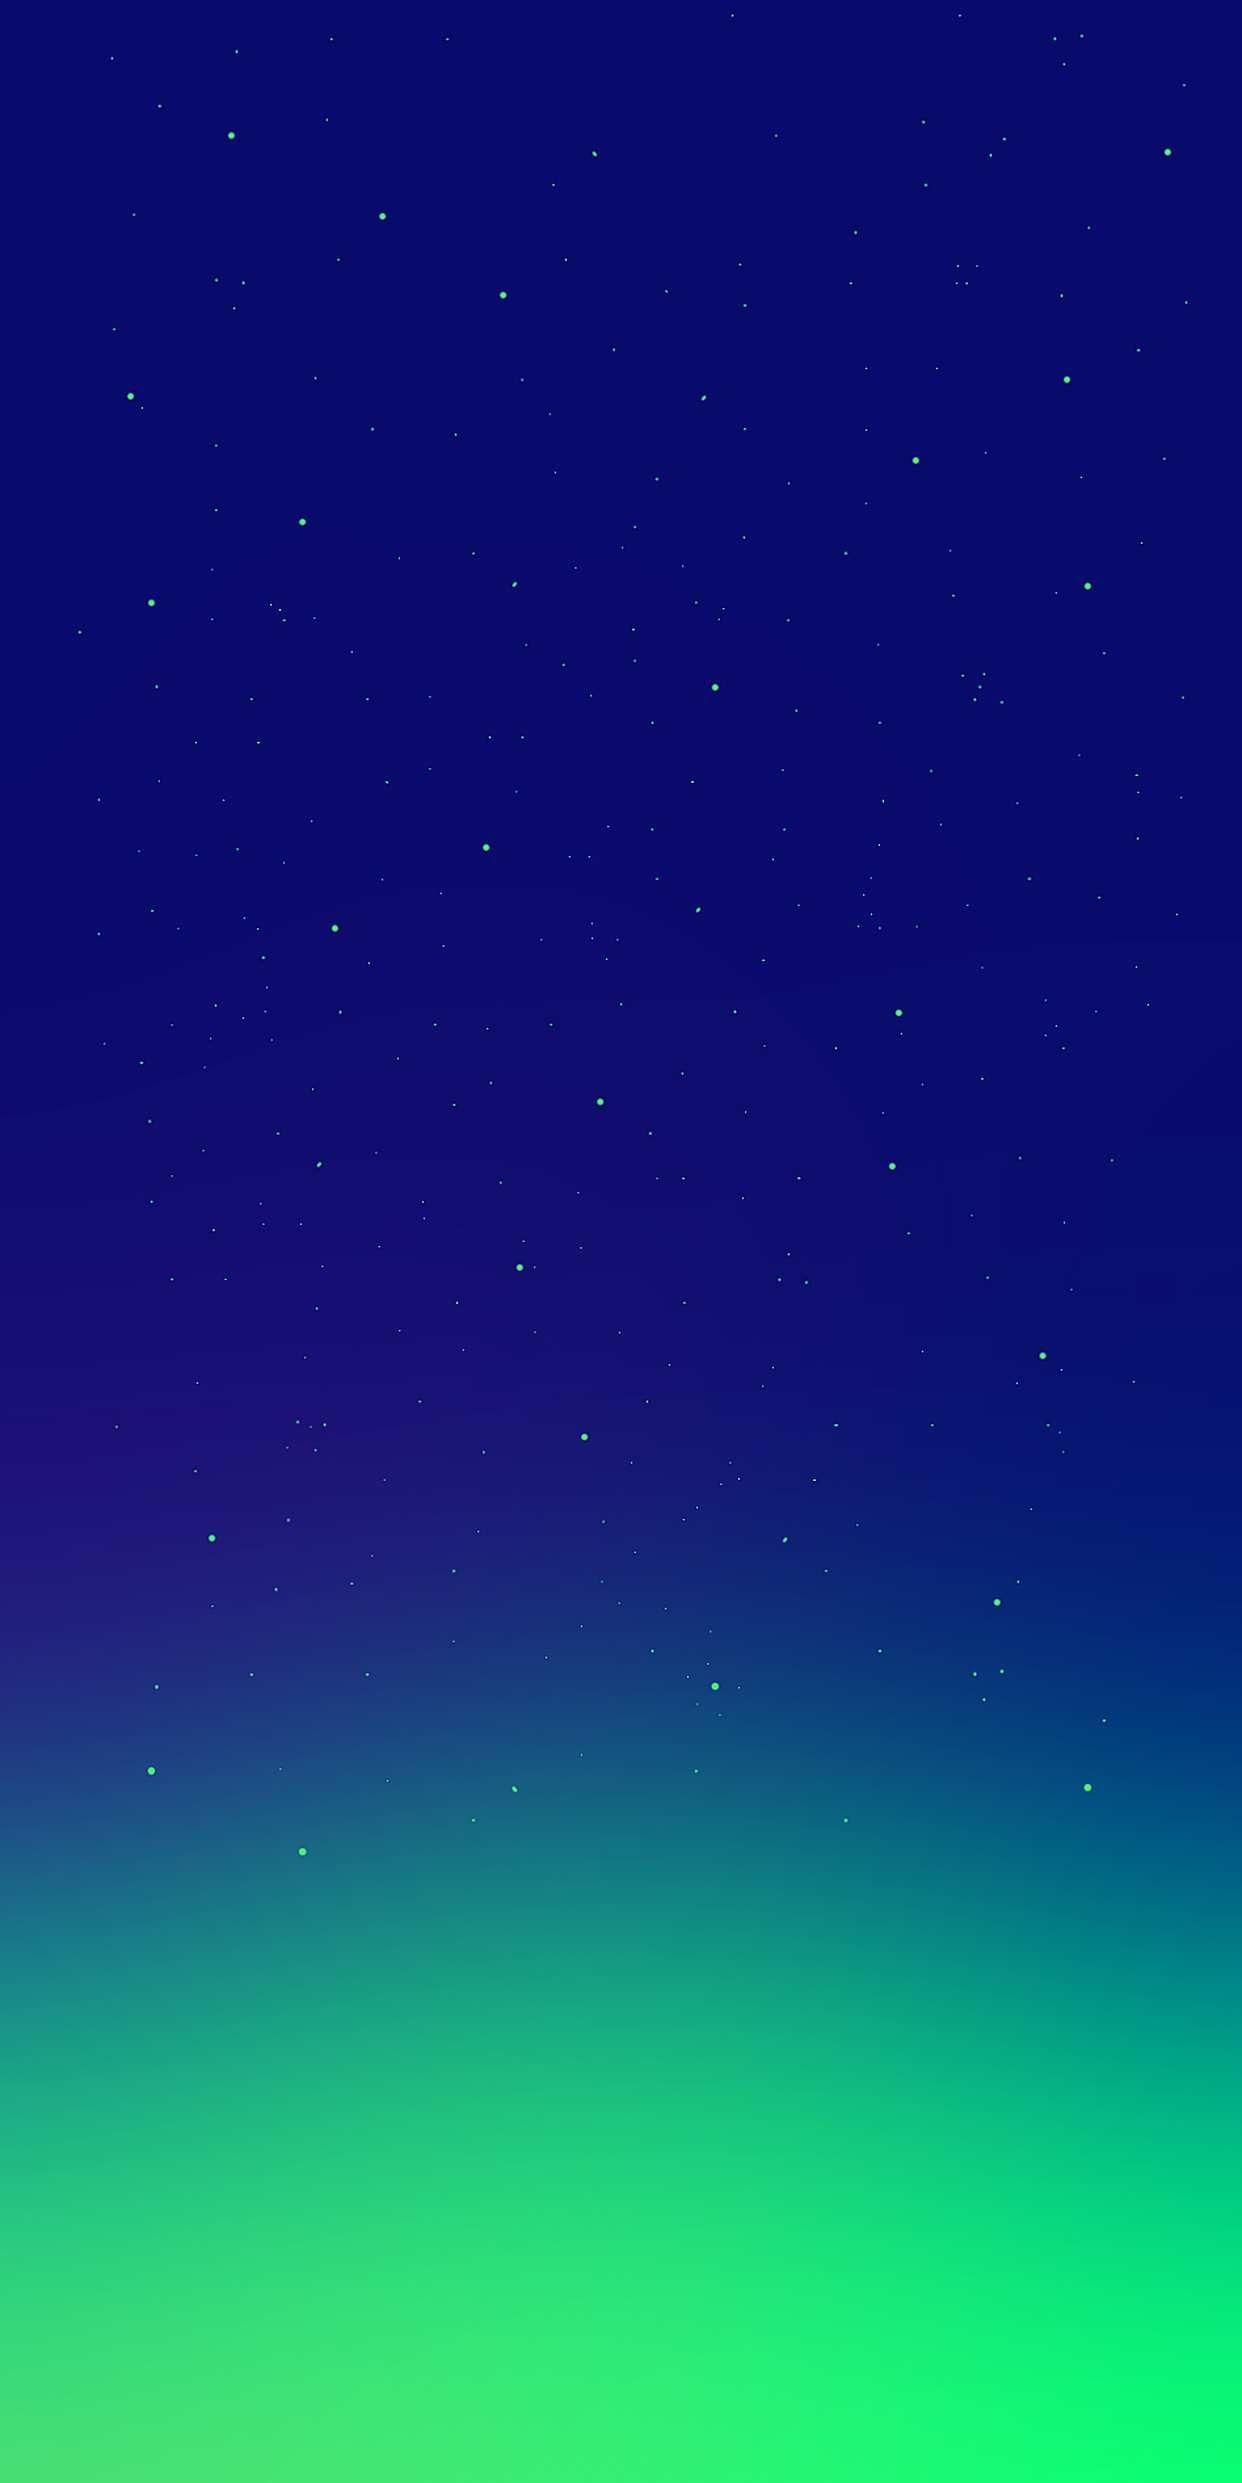 Universe for iPhone XS MAX iPhone XR. iPhone wallpaper, Qhd